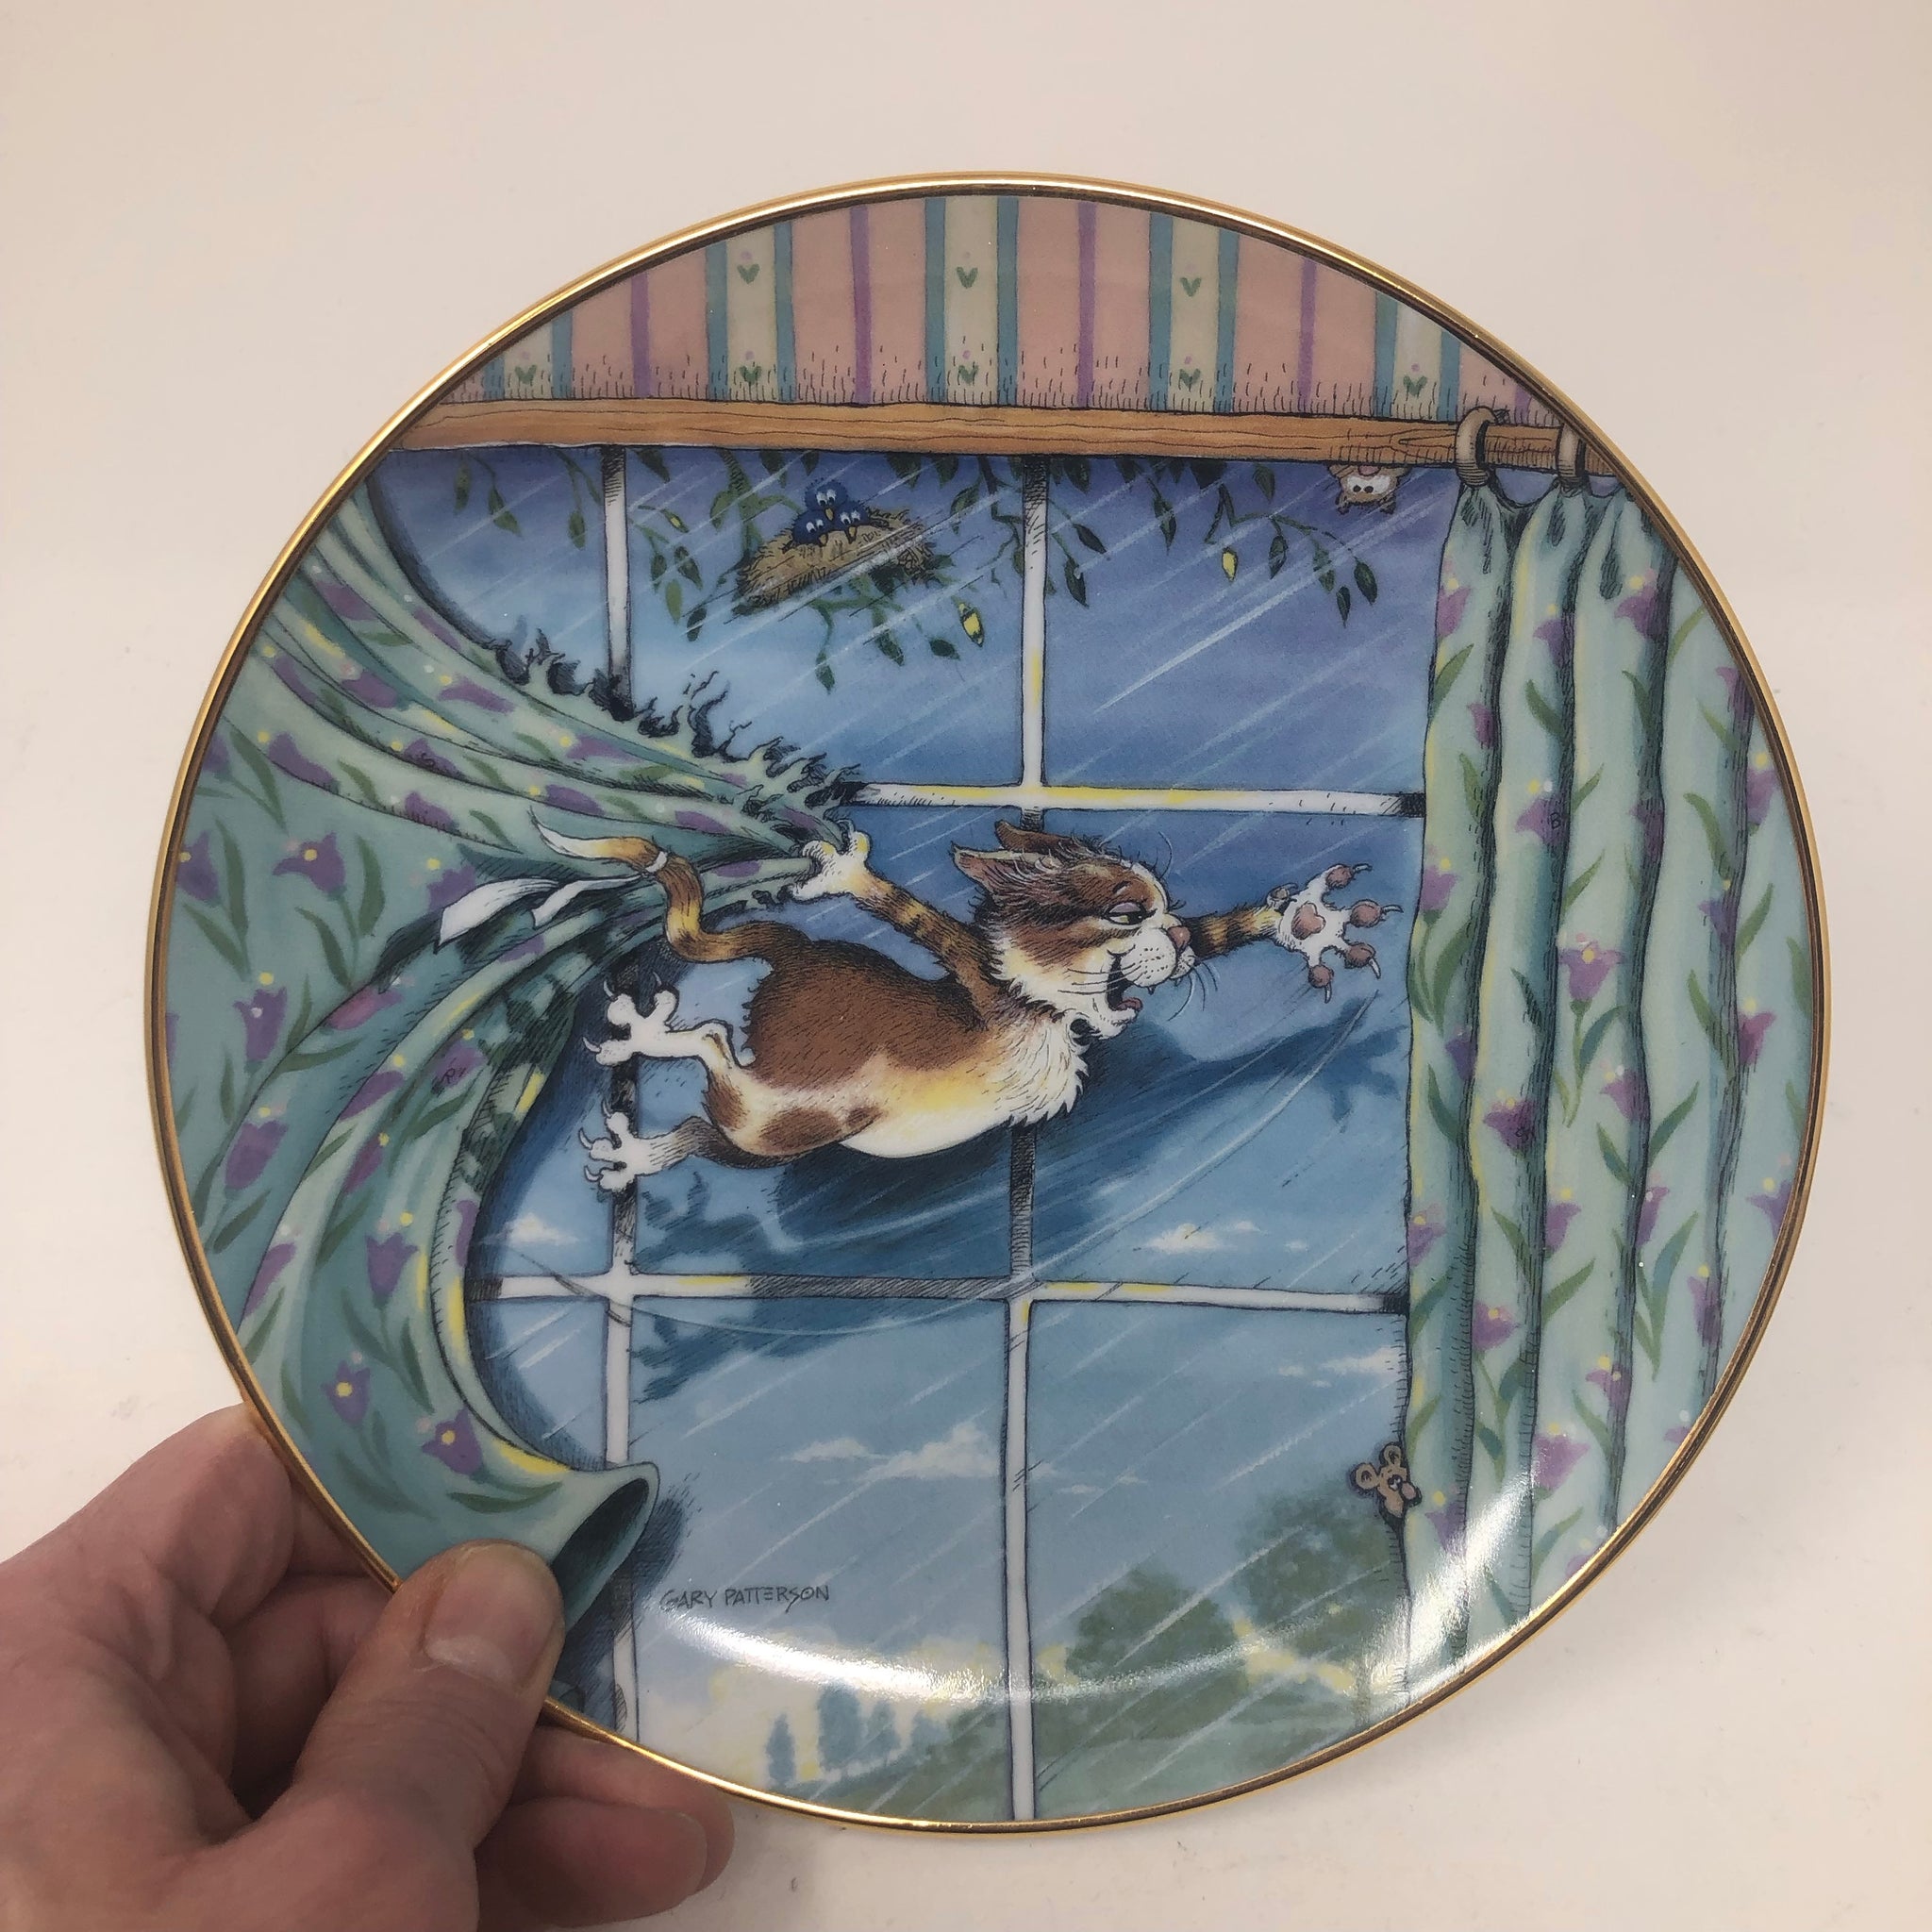 Vintage Set of 8 Gary Patterson Plates